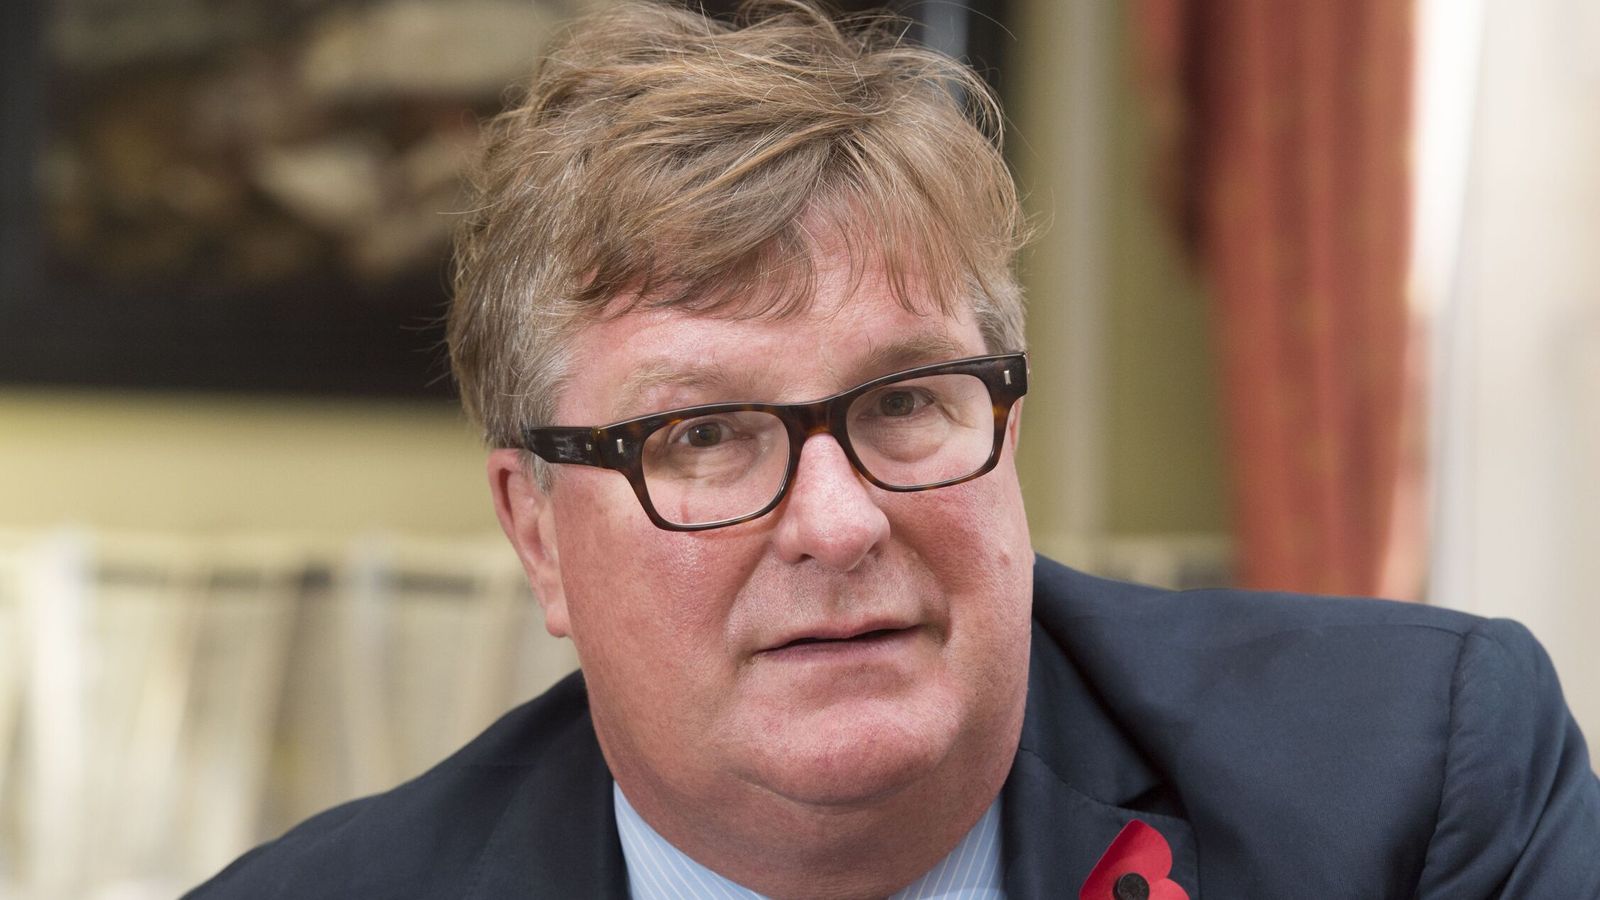 Crispin Odey: City watchdog in contact with police as scope of probe revealed